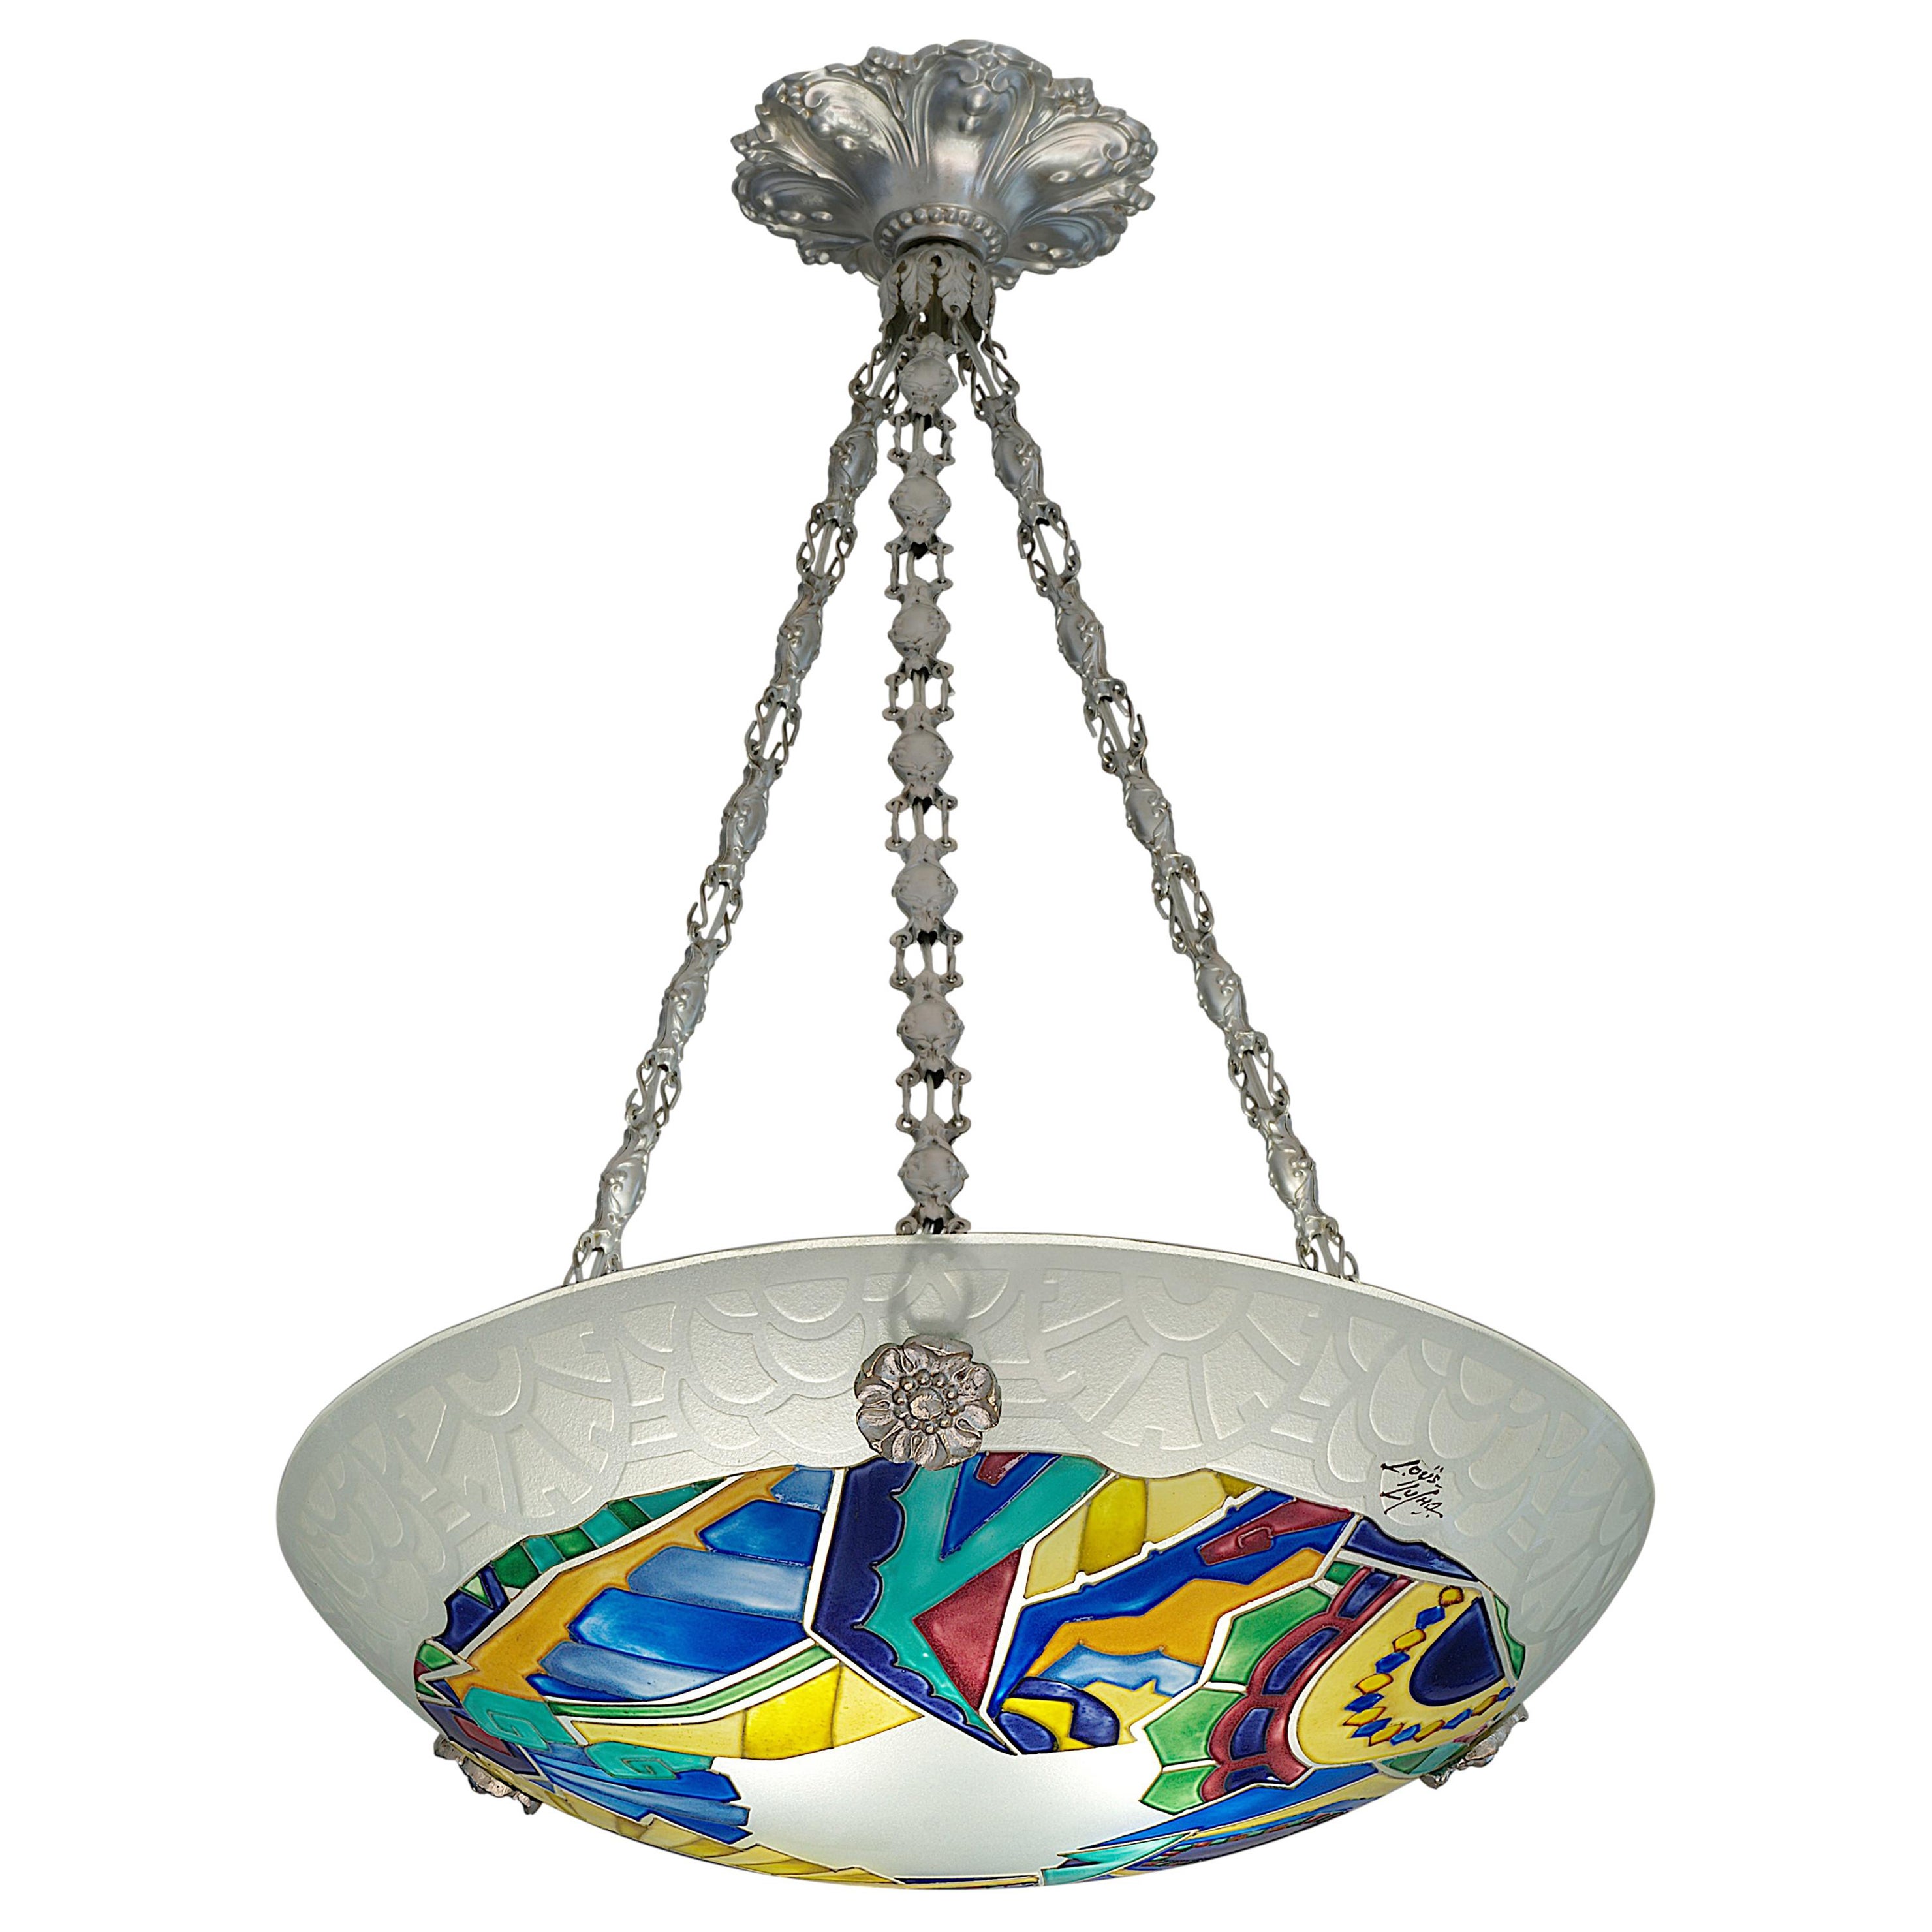 Loys Lucha Stunning French Art Deco Pendant Chandelier, 1920s For Sale